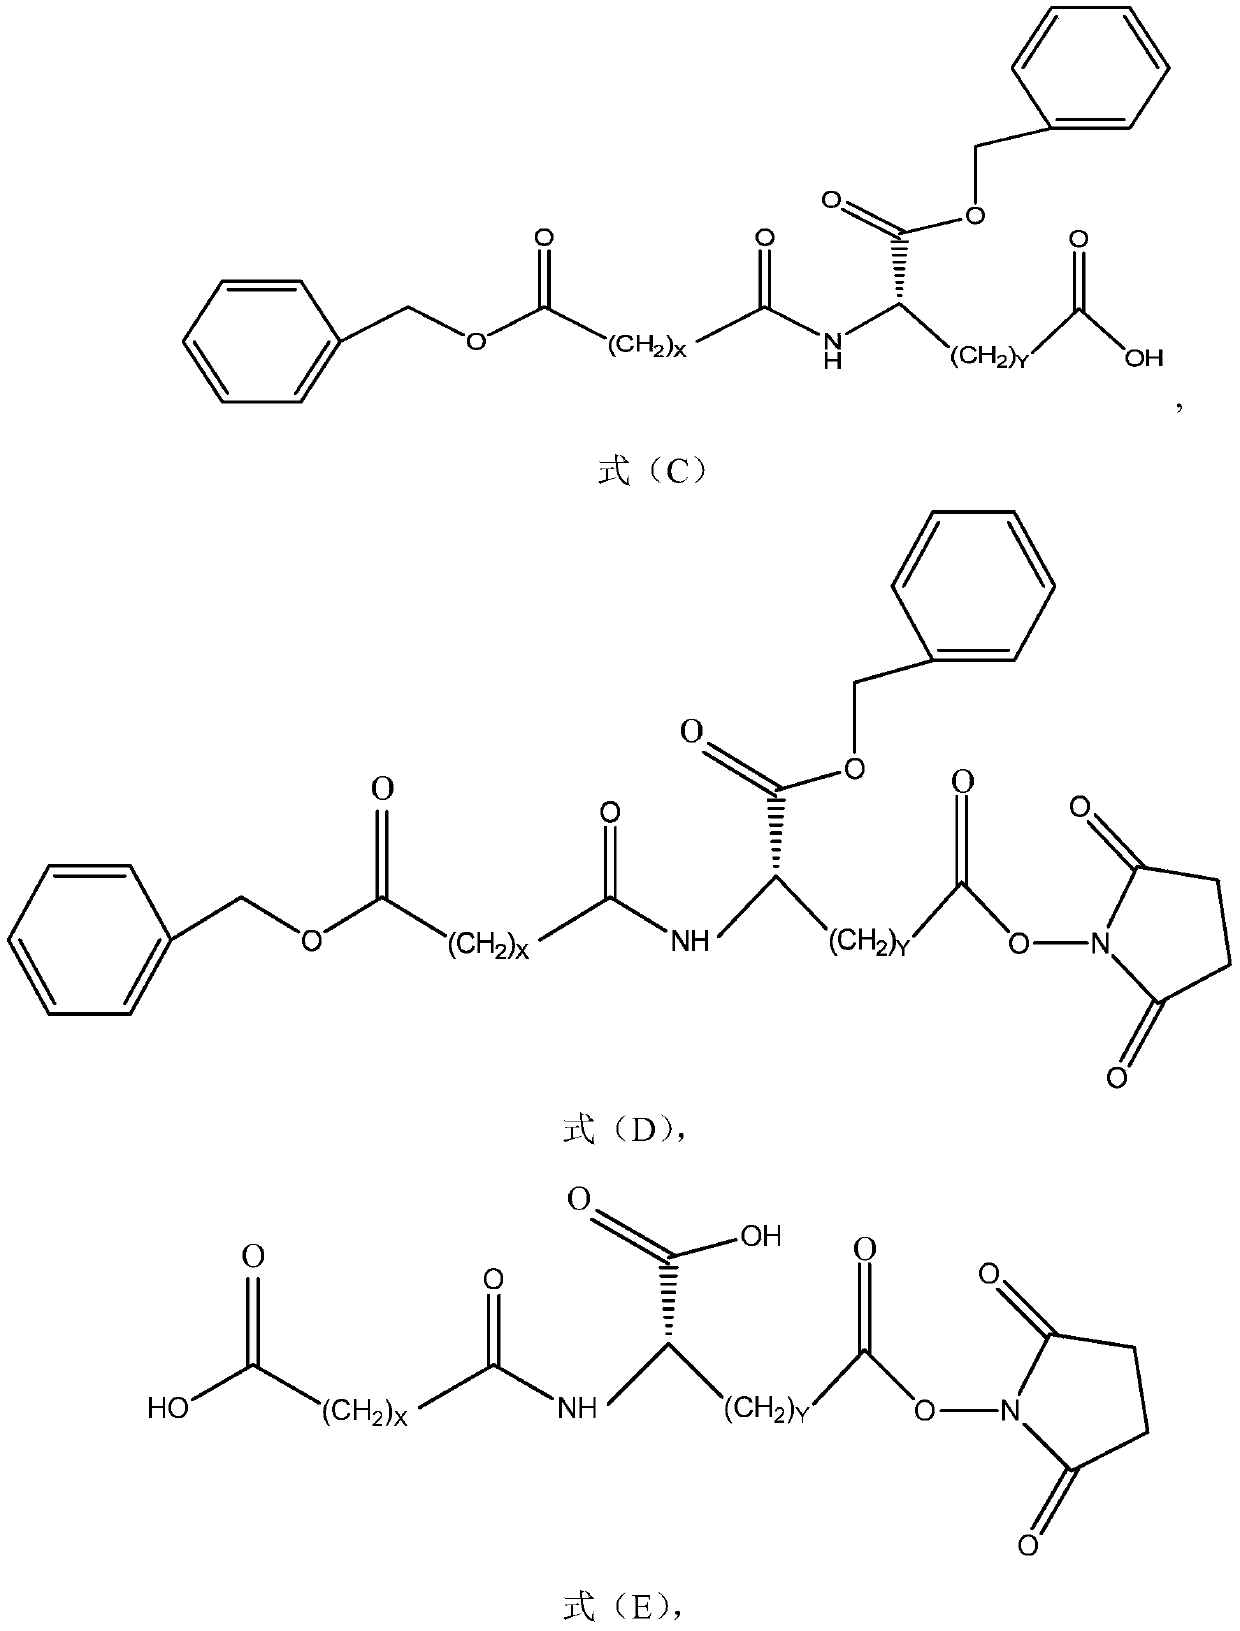 Method for preparing long-chain fatty diacid monobenzyl ester and application of long-chain fatty diacid monobenzyl ester